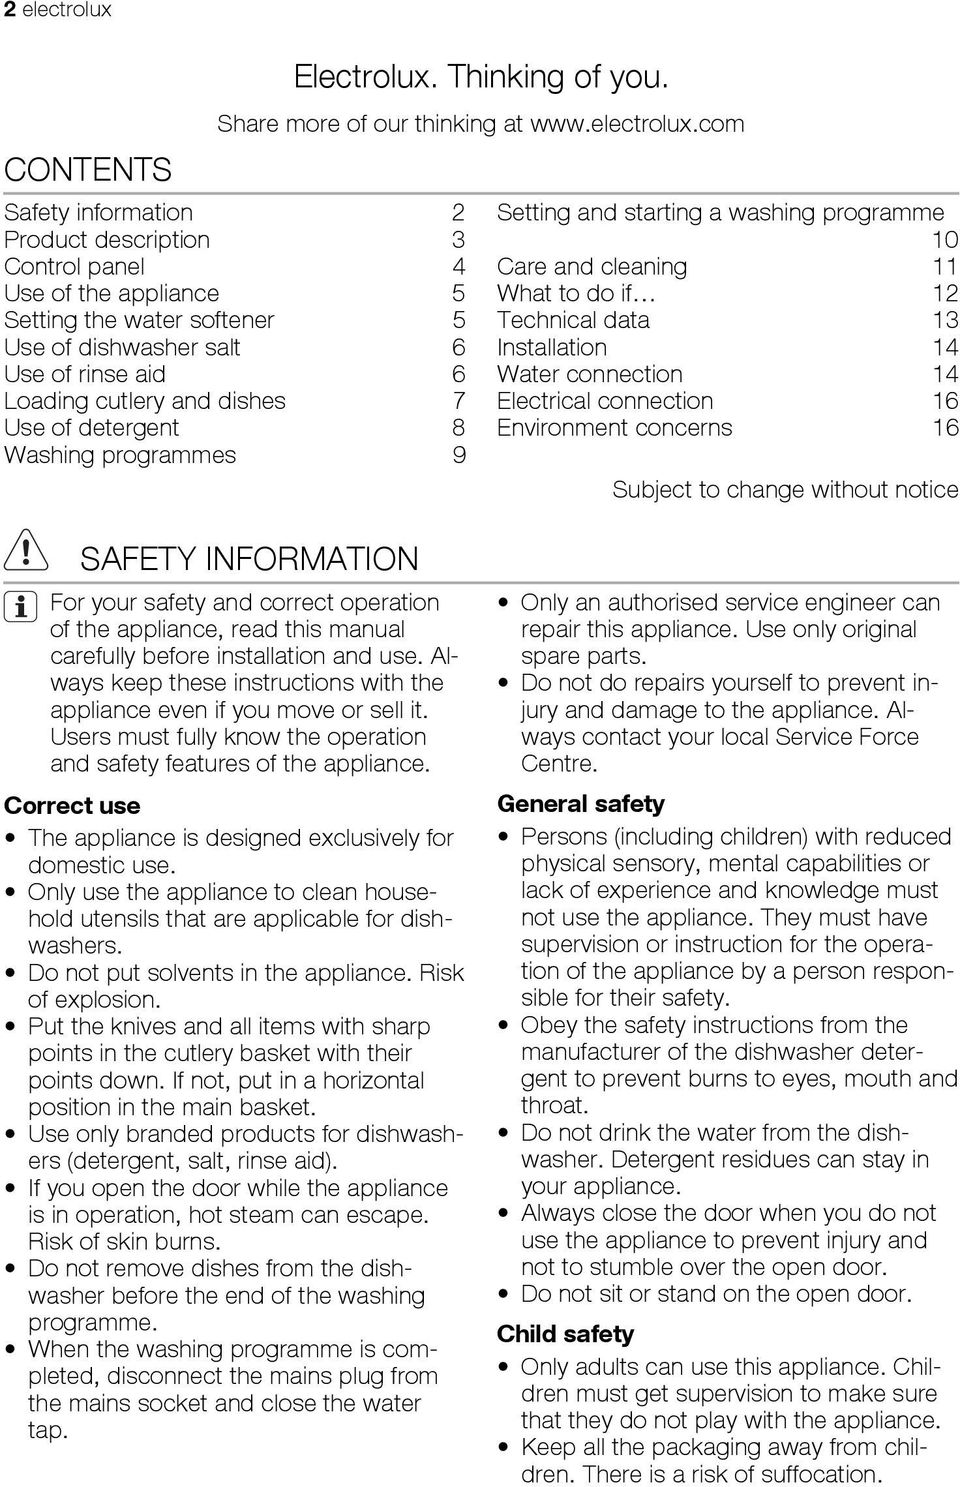 com Safety information 2 Product description 3 Control panel 4 Use of the appliance 5 Setting the water softener 5 Use of dishwasher salt 6 Use of rinse aid 6 Loading cutlery and dishes 7 Use of